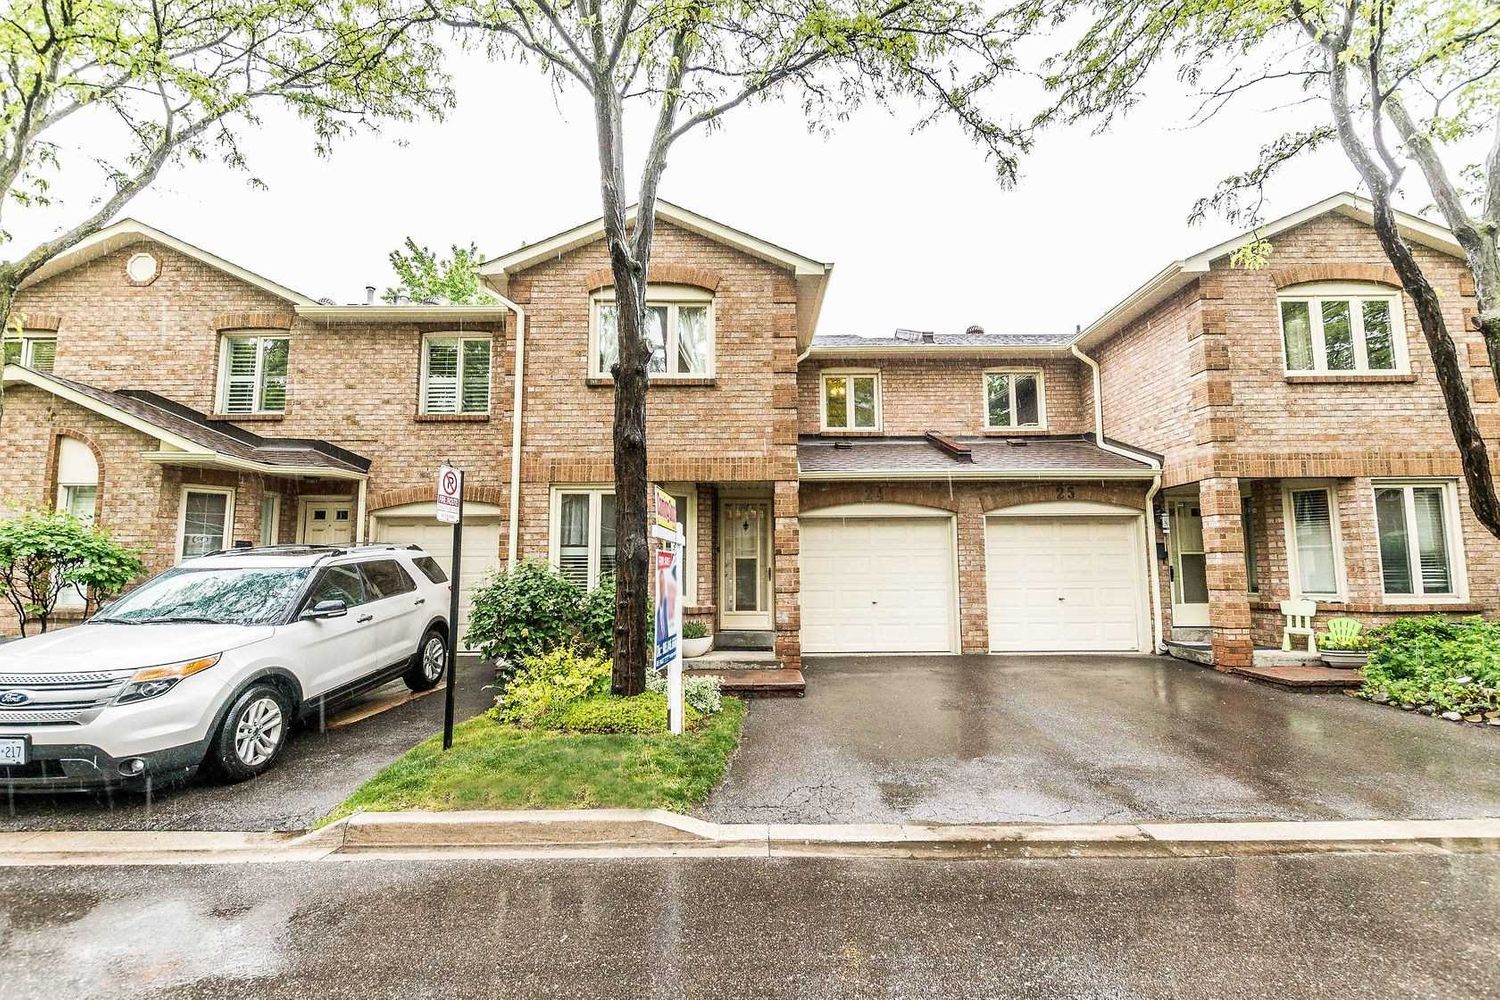 5020 Delaware Drive. 5020 Delaware Drive Townhomes is located in  Mississauga, Toronto - image #1 of 2